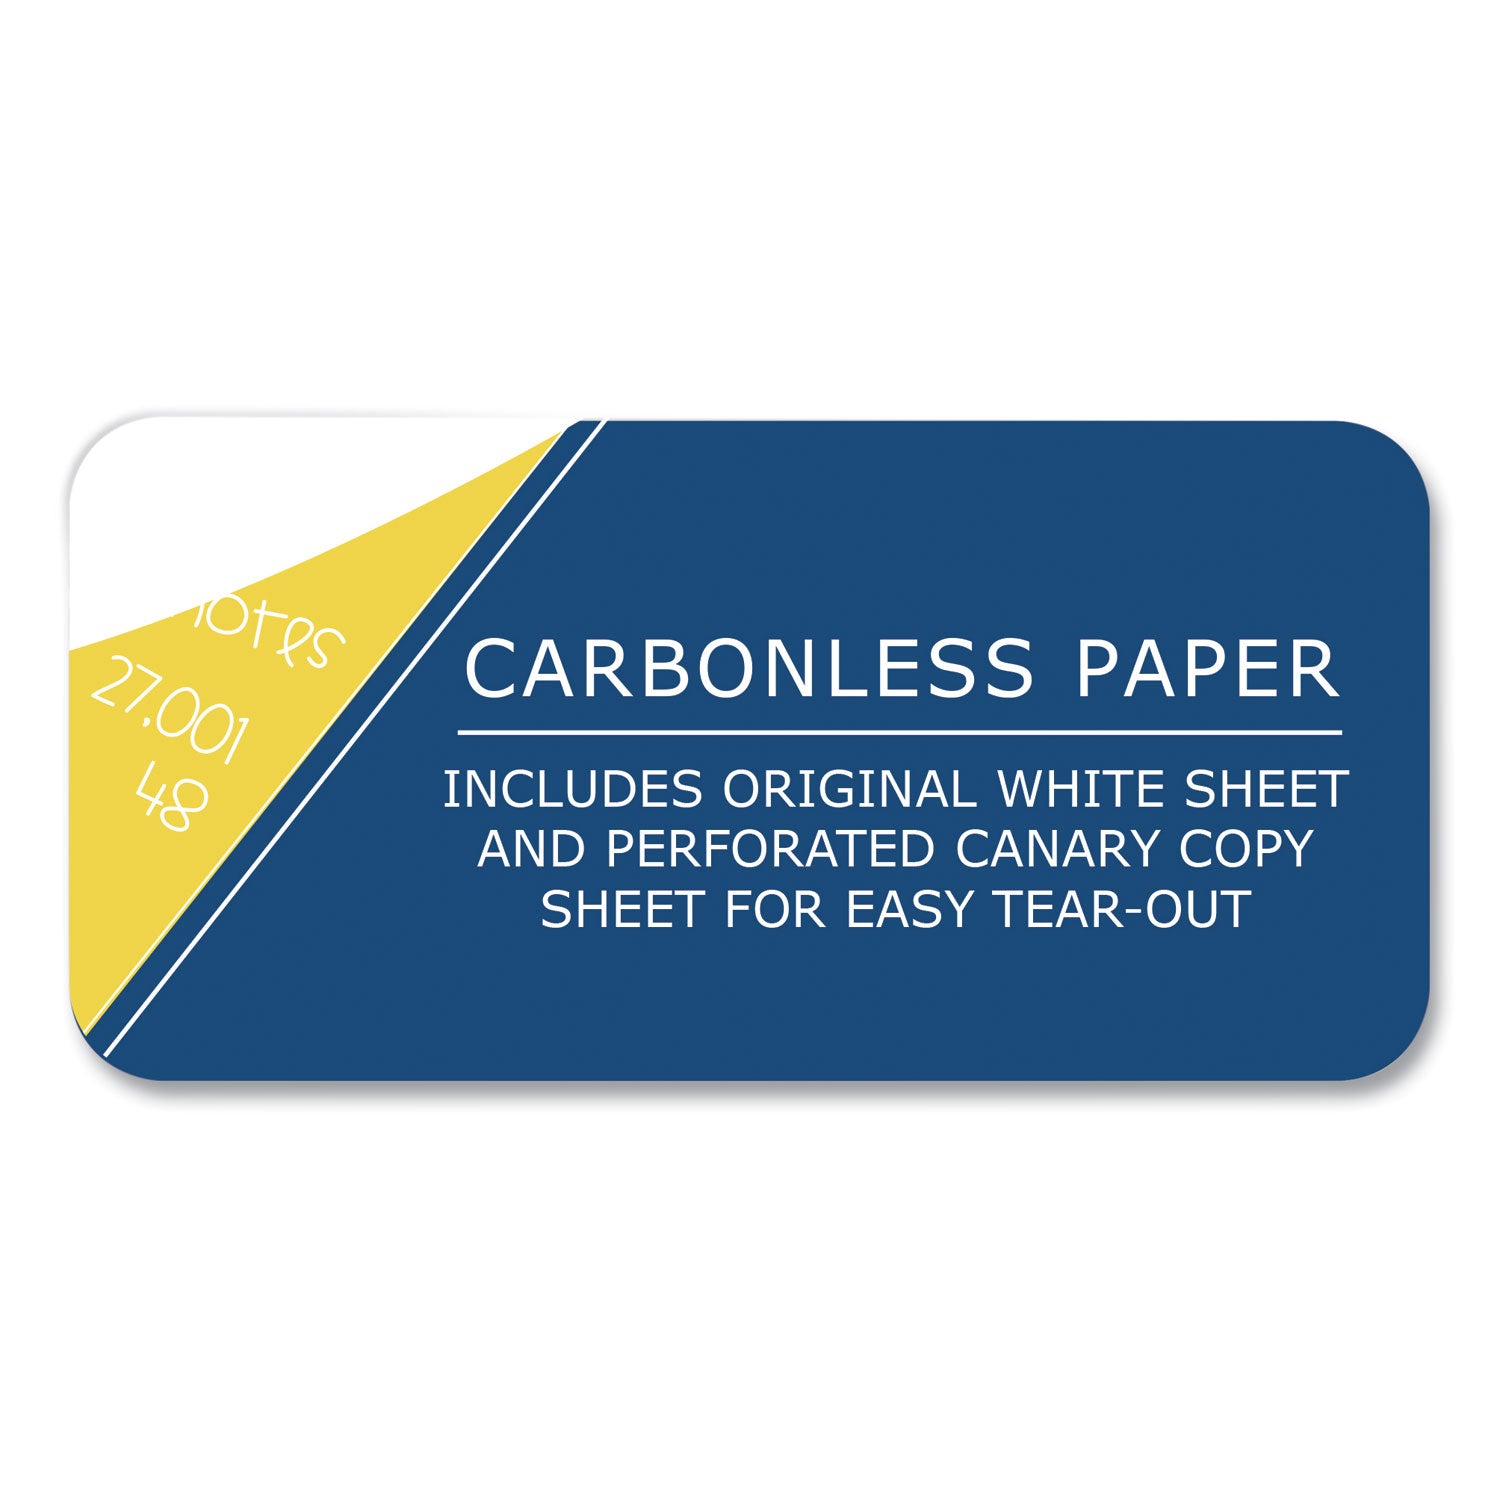 lab-and-science-carbonless-notebook-quad-rule-4-sq-in-gray-cover-100-11x925-sheets-12-ct-ships-in-4-6-business-days_roa77645cs - 7